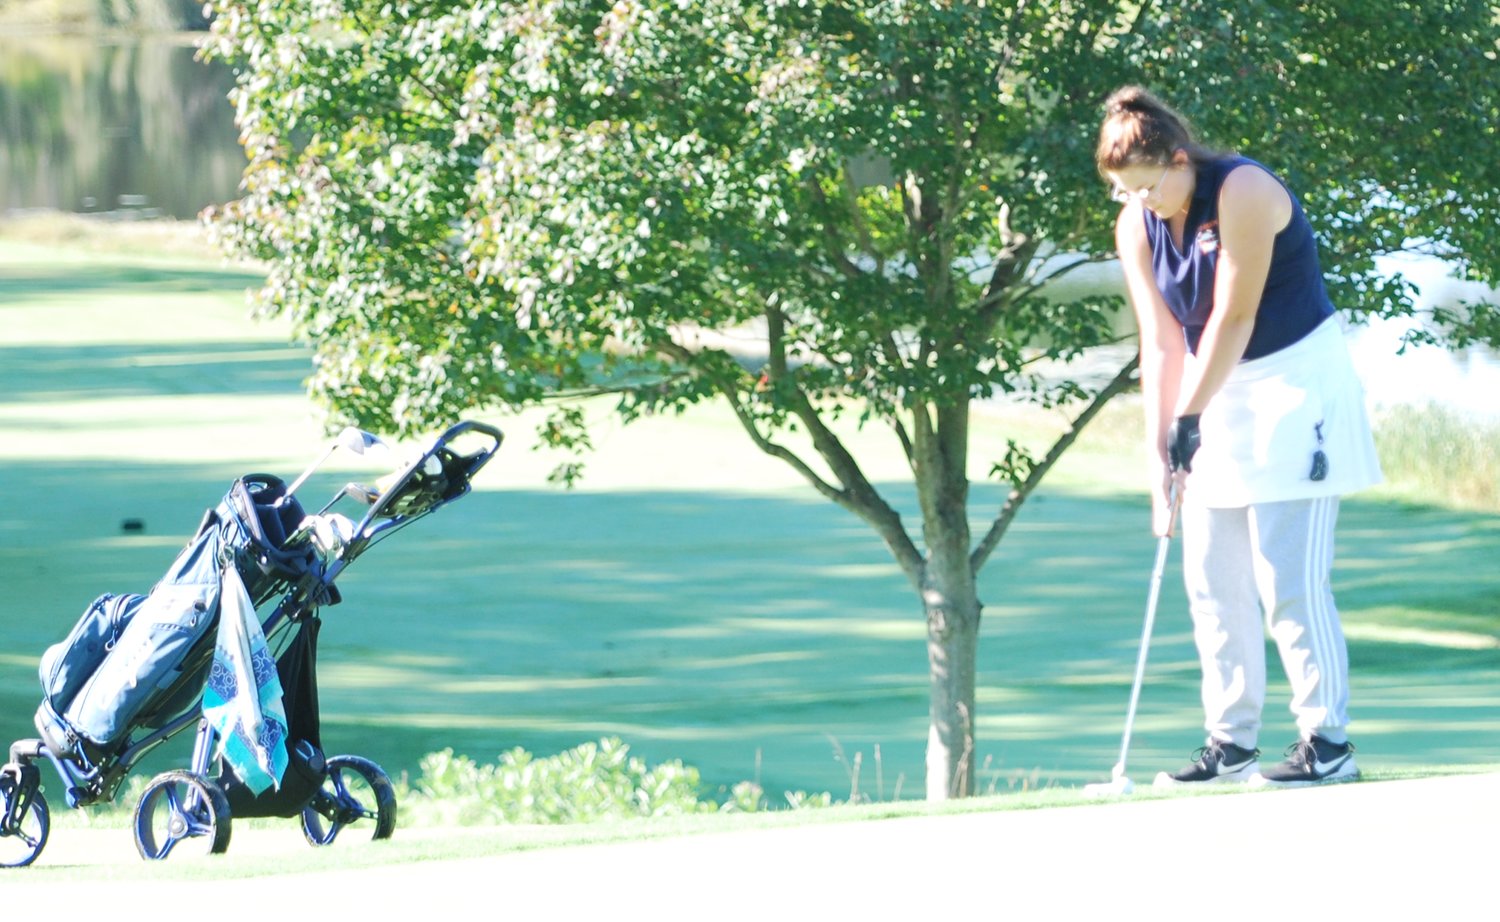 North Montgomery's Grace Shrader fired a 116 at the sectional on Saturday.